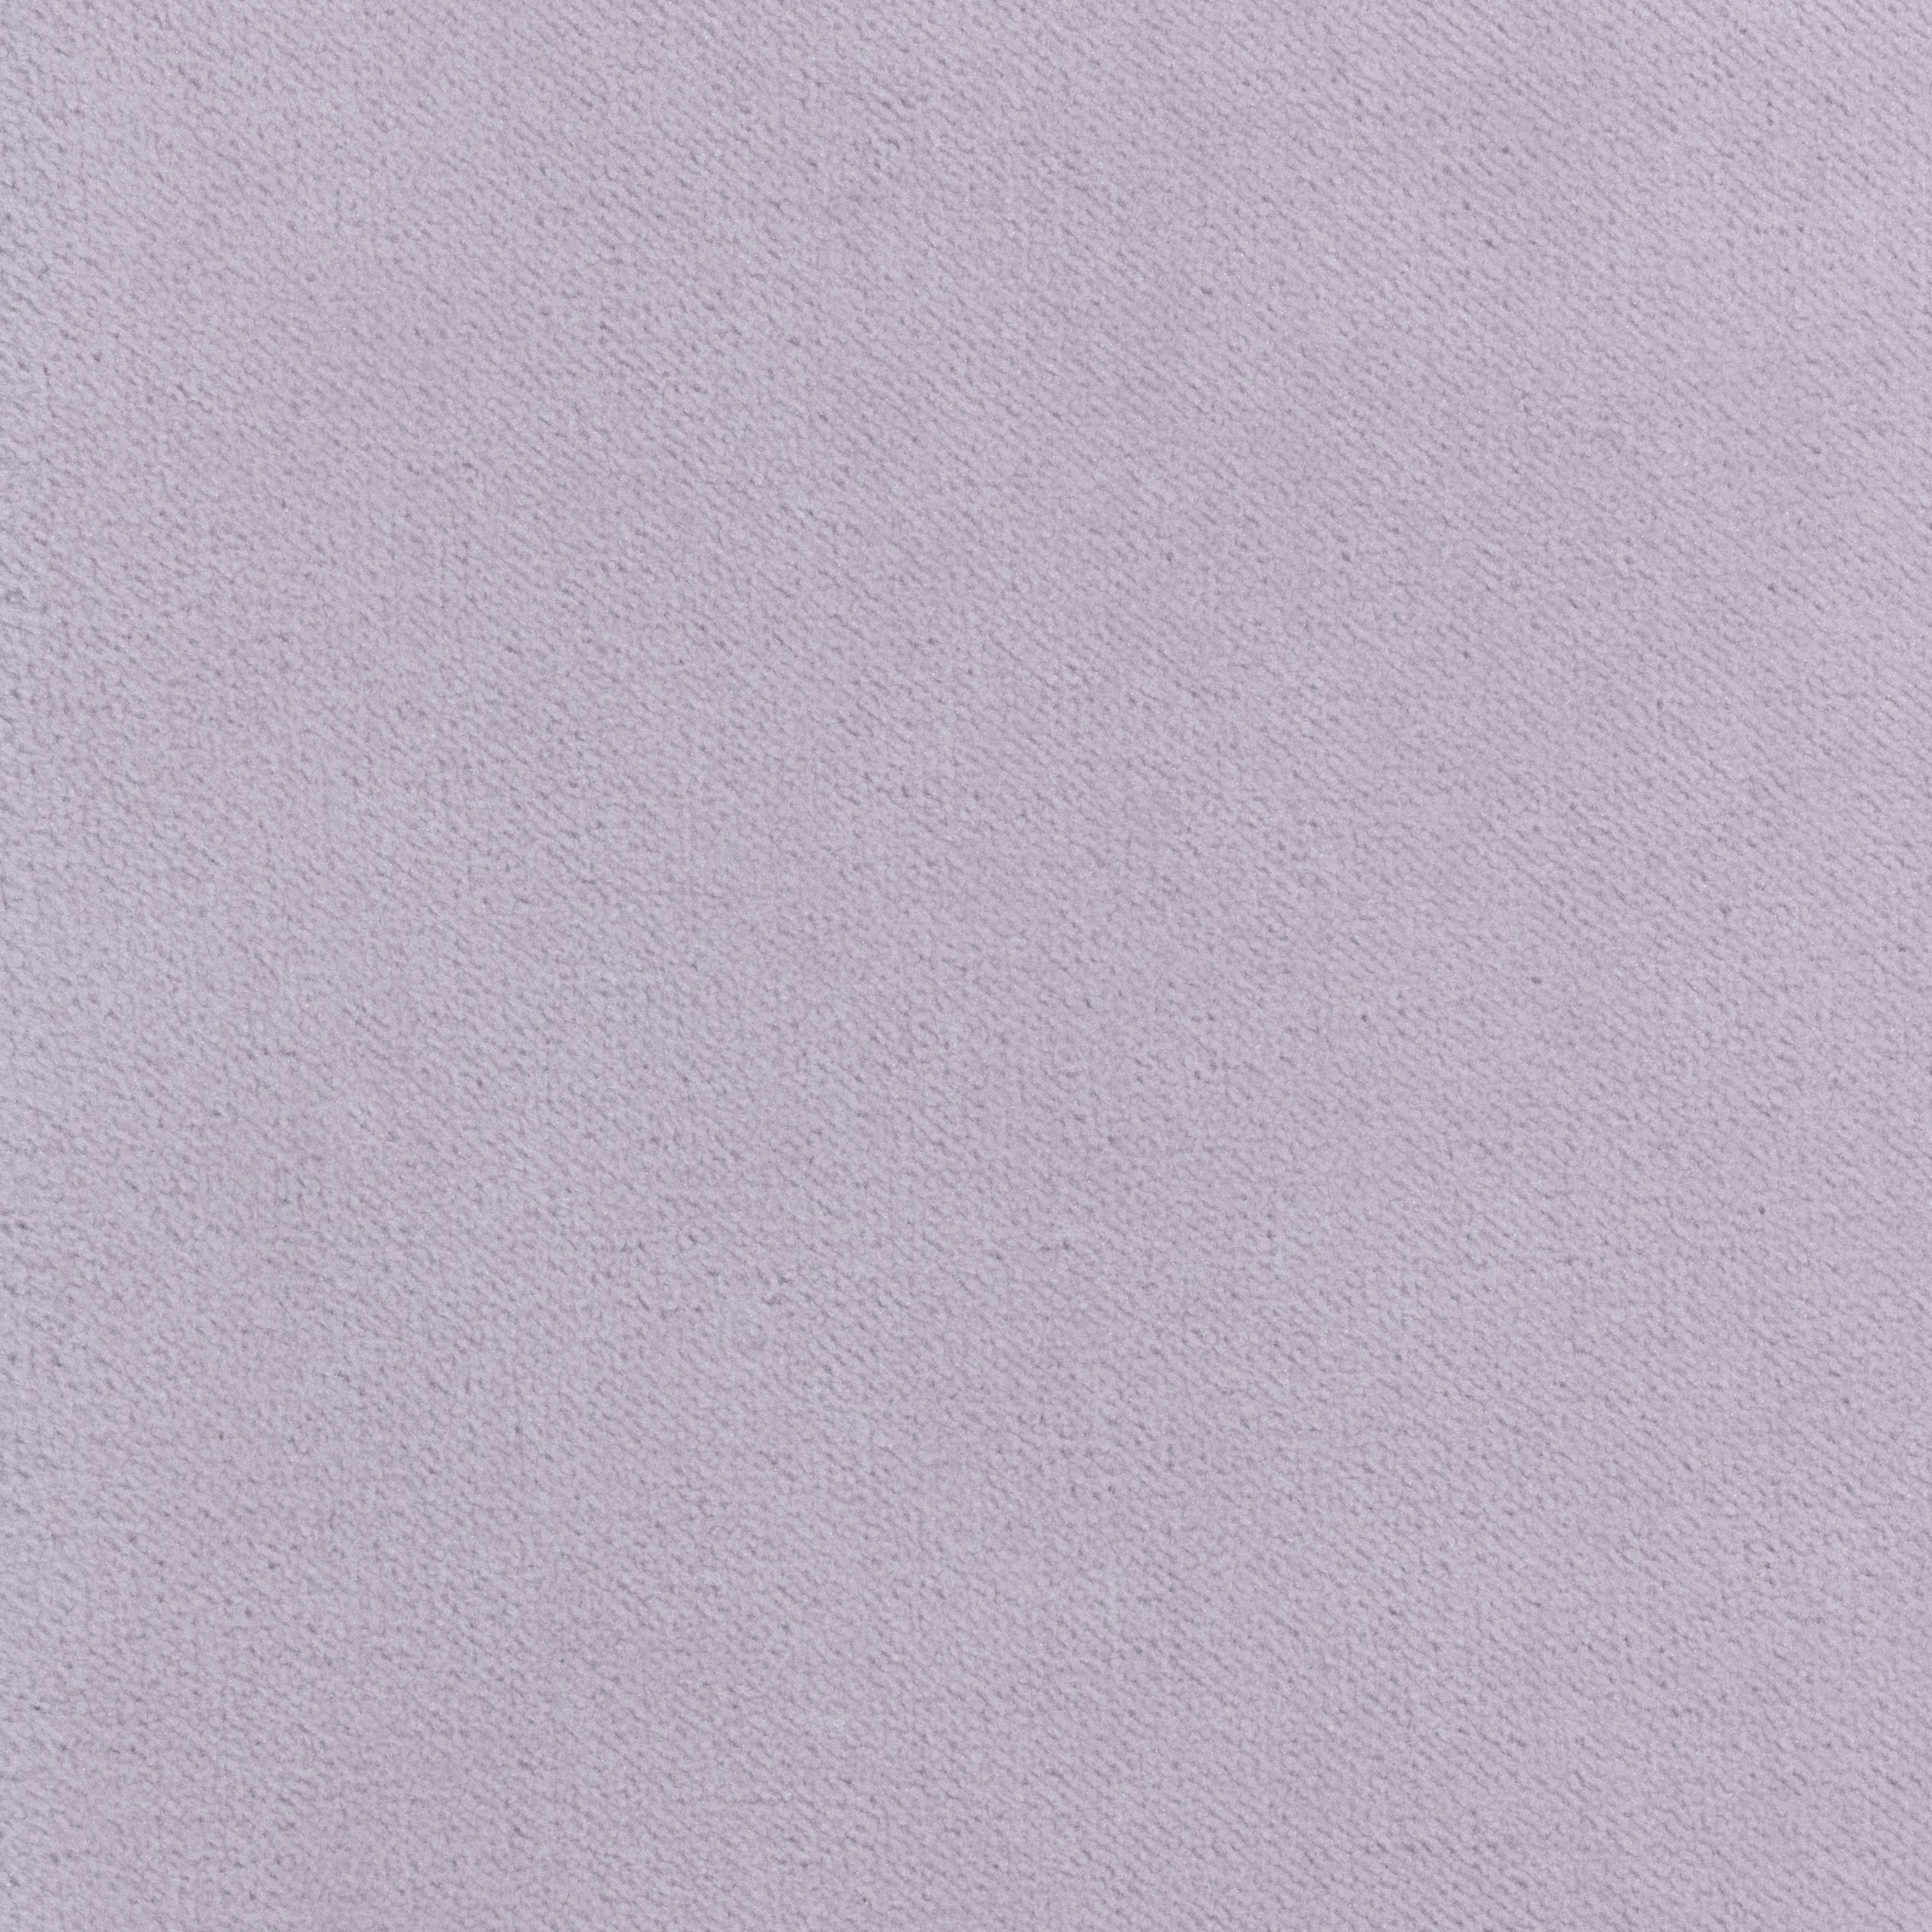 Club Velvet fabric in lilac color - pattern number W7214 - by Thibaut in the Club Velvet collection